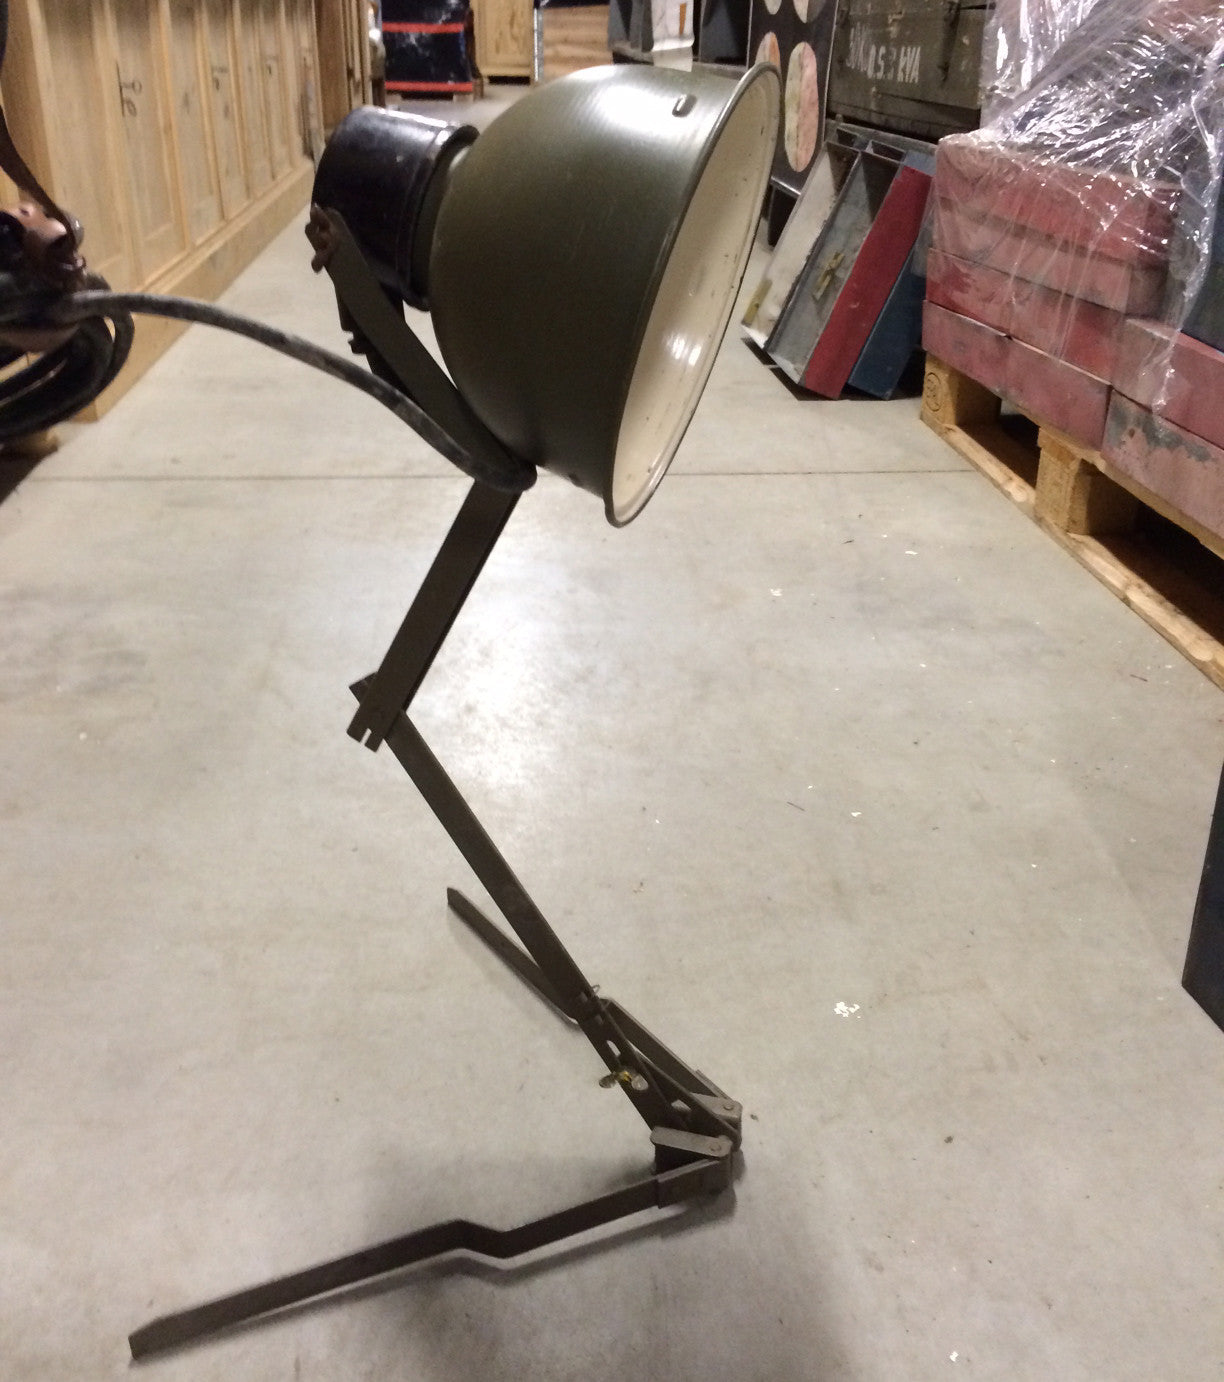 Vintage Folding Army Table Lamp- Green and Cream Enamel